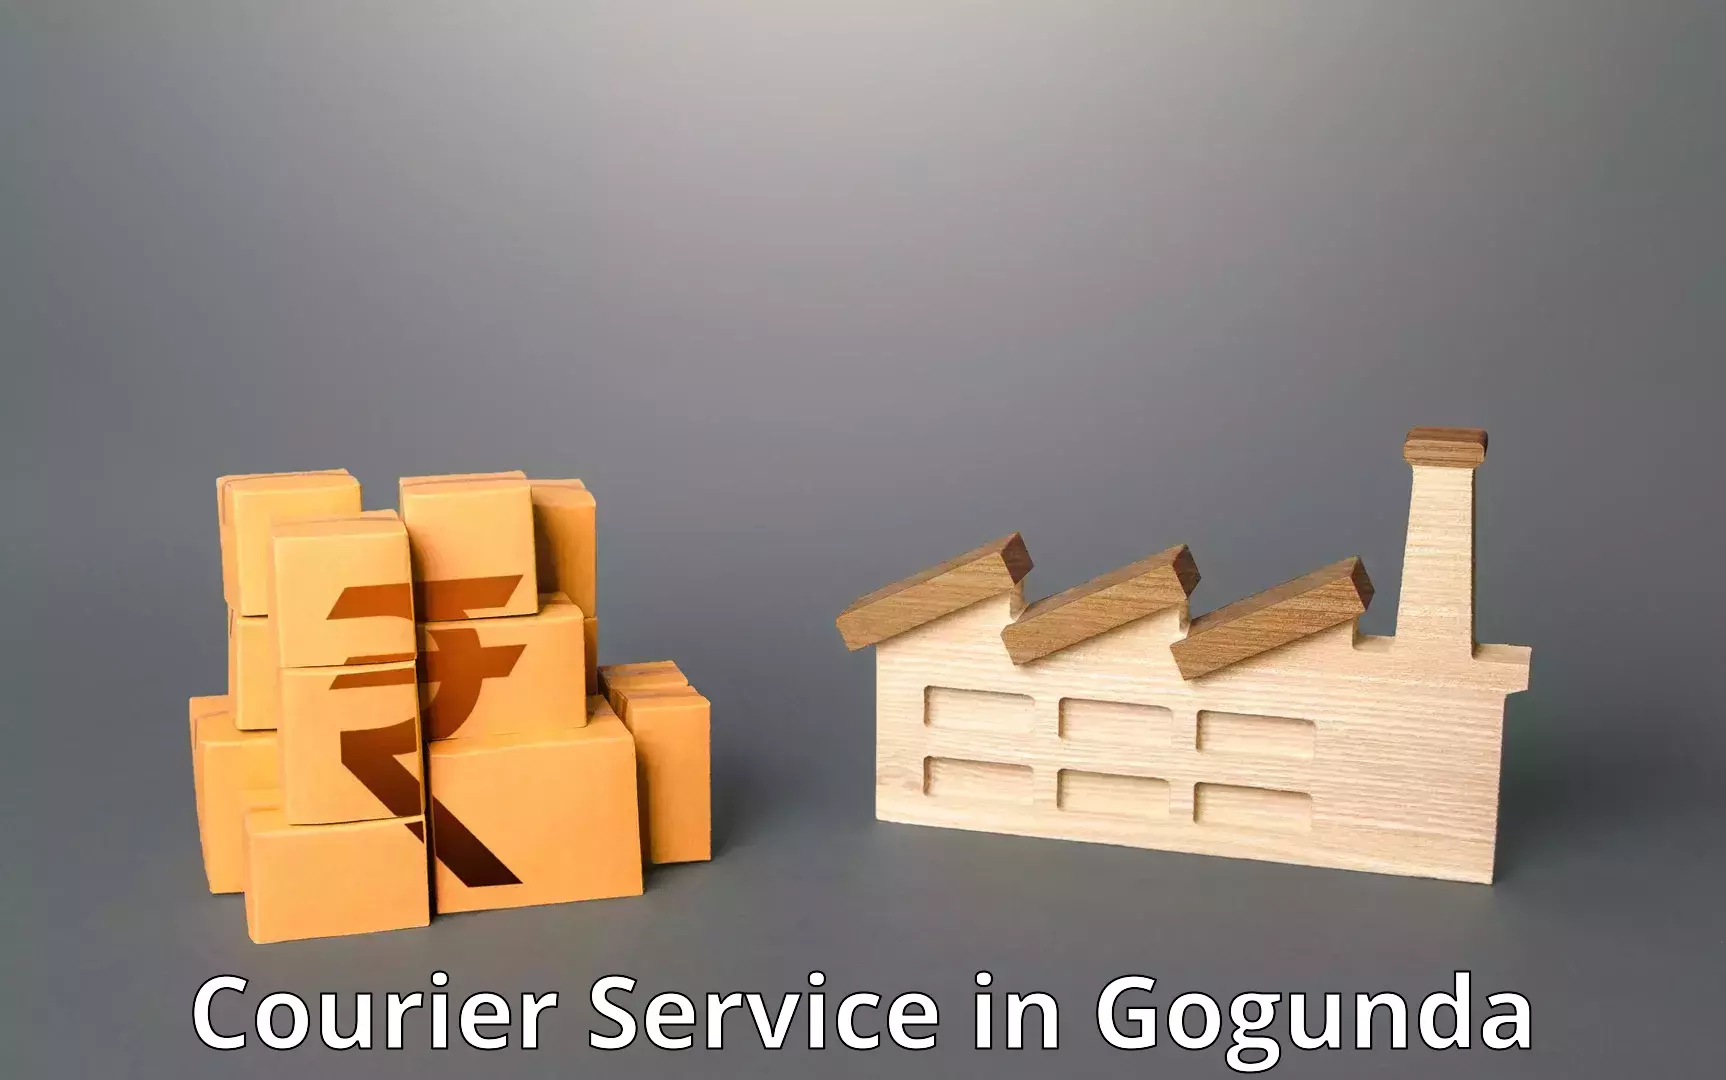 24-hour delivery options in Gogunda